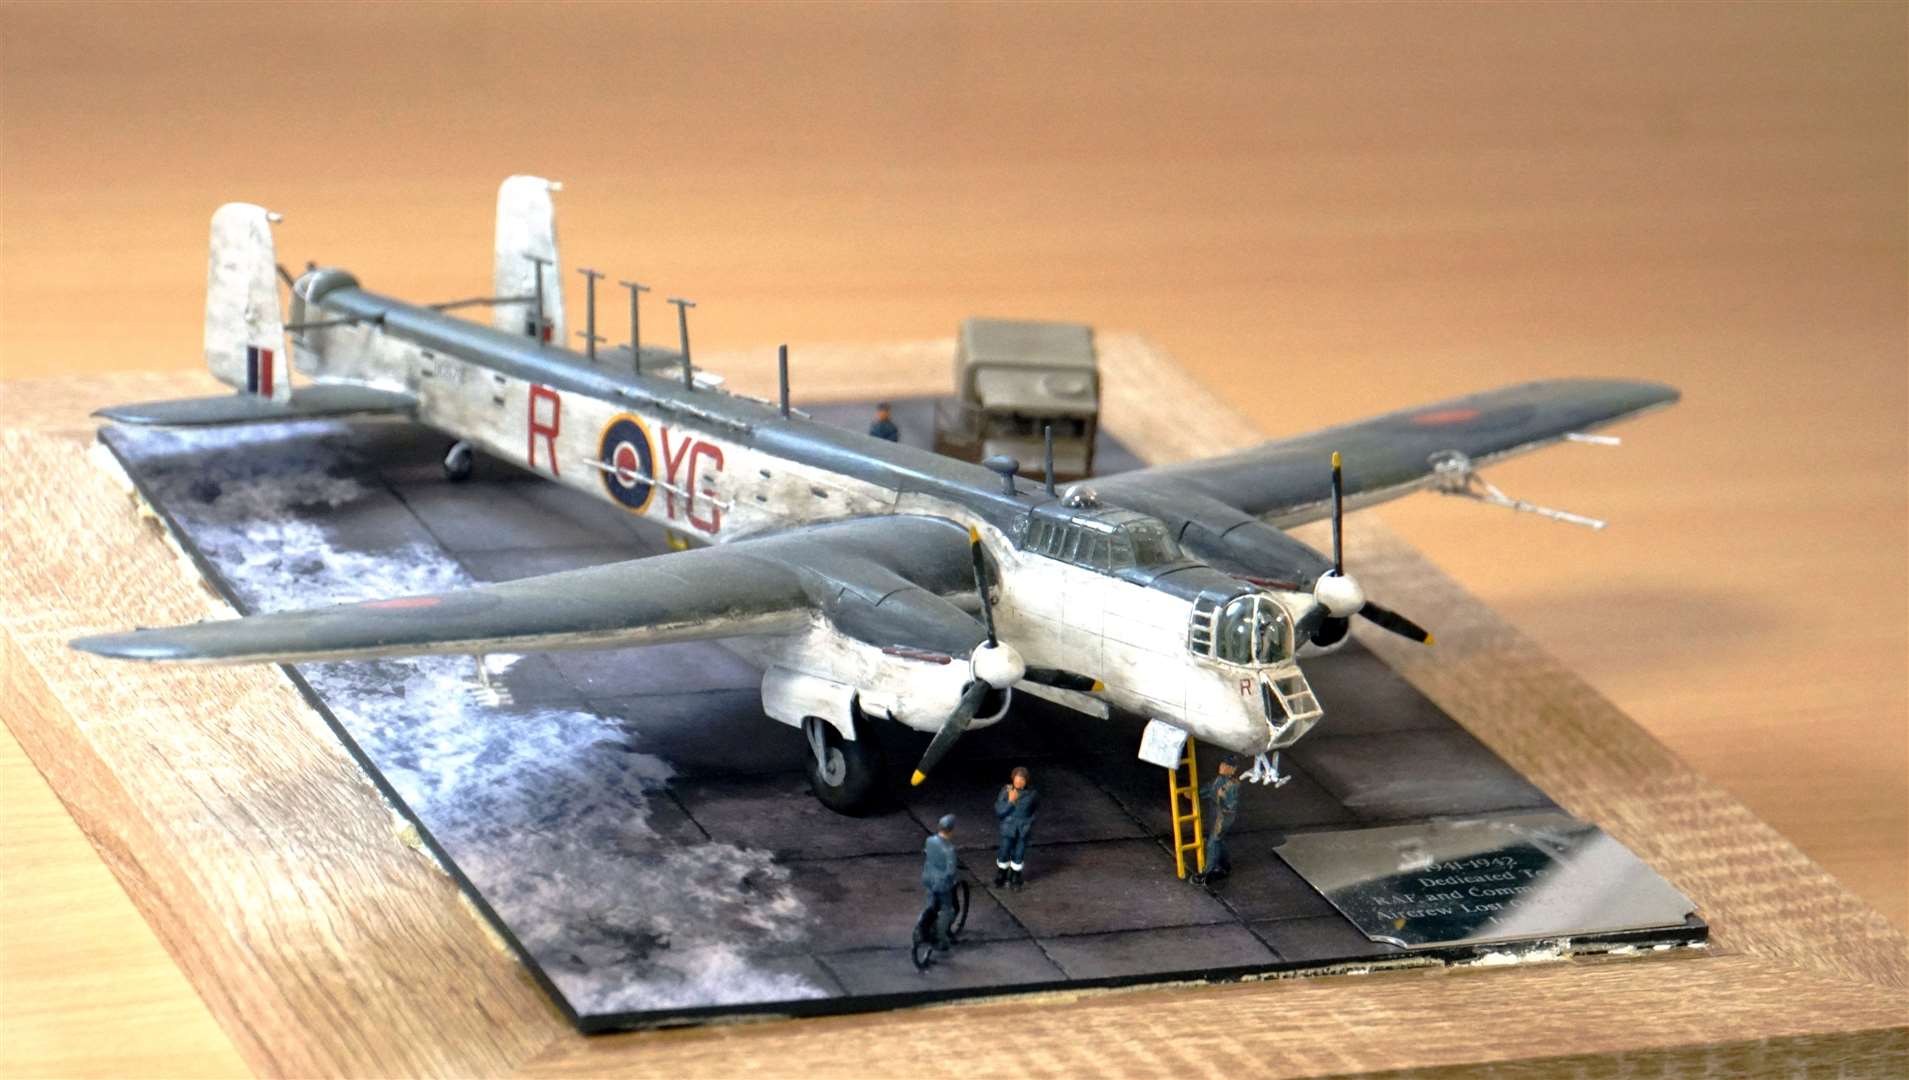 This scale model of a WW2 era Whitley bomber was recently constructed by ex-military man James More and given to Wick John o' Groats Airport where it will eventually be displayed to the public. James, a Wick local, made the model as a tribute to all RAF crew who lost their lives in Caithness during the war and especially the pilots killed when their Whitley Mk VII from 502 Squadron, based at the airport, crashed into Scaraben East in May 1941. He has been researching many of the crash sites in Caithness and hopes to see memorial cairns erected in memory of the Whitley crew and those from a Canberra jet bomber which also crashed in the same area 25 years later in 1966.